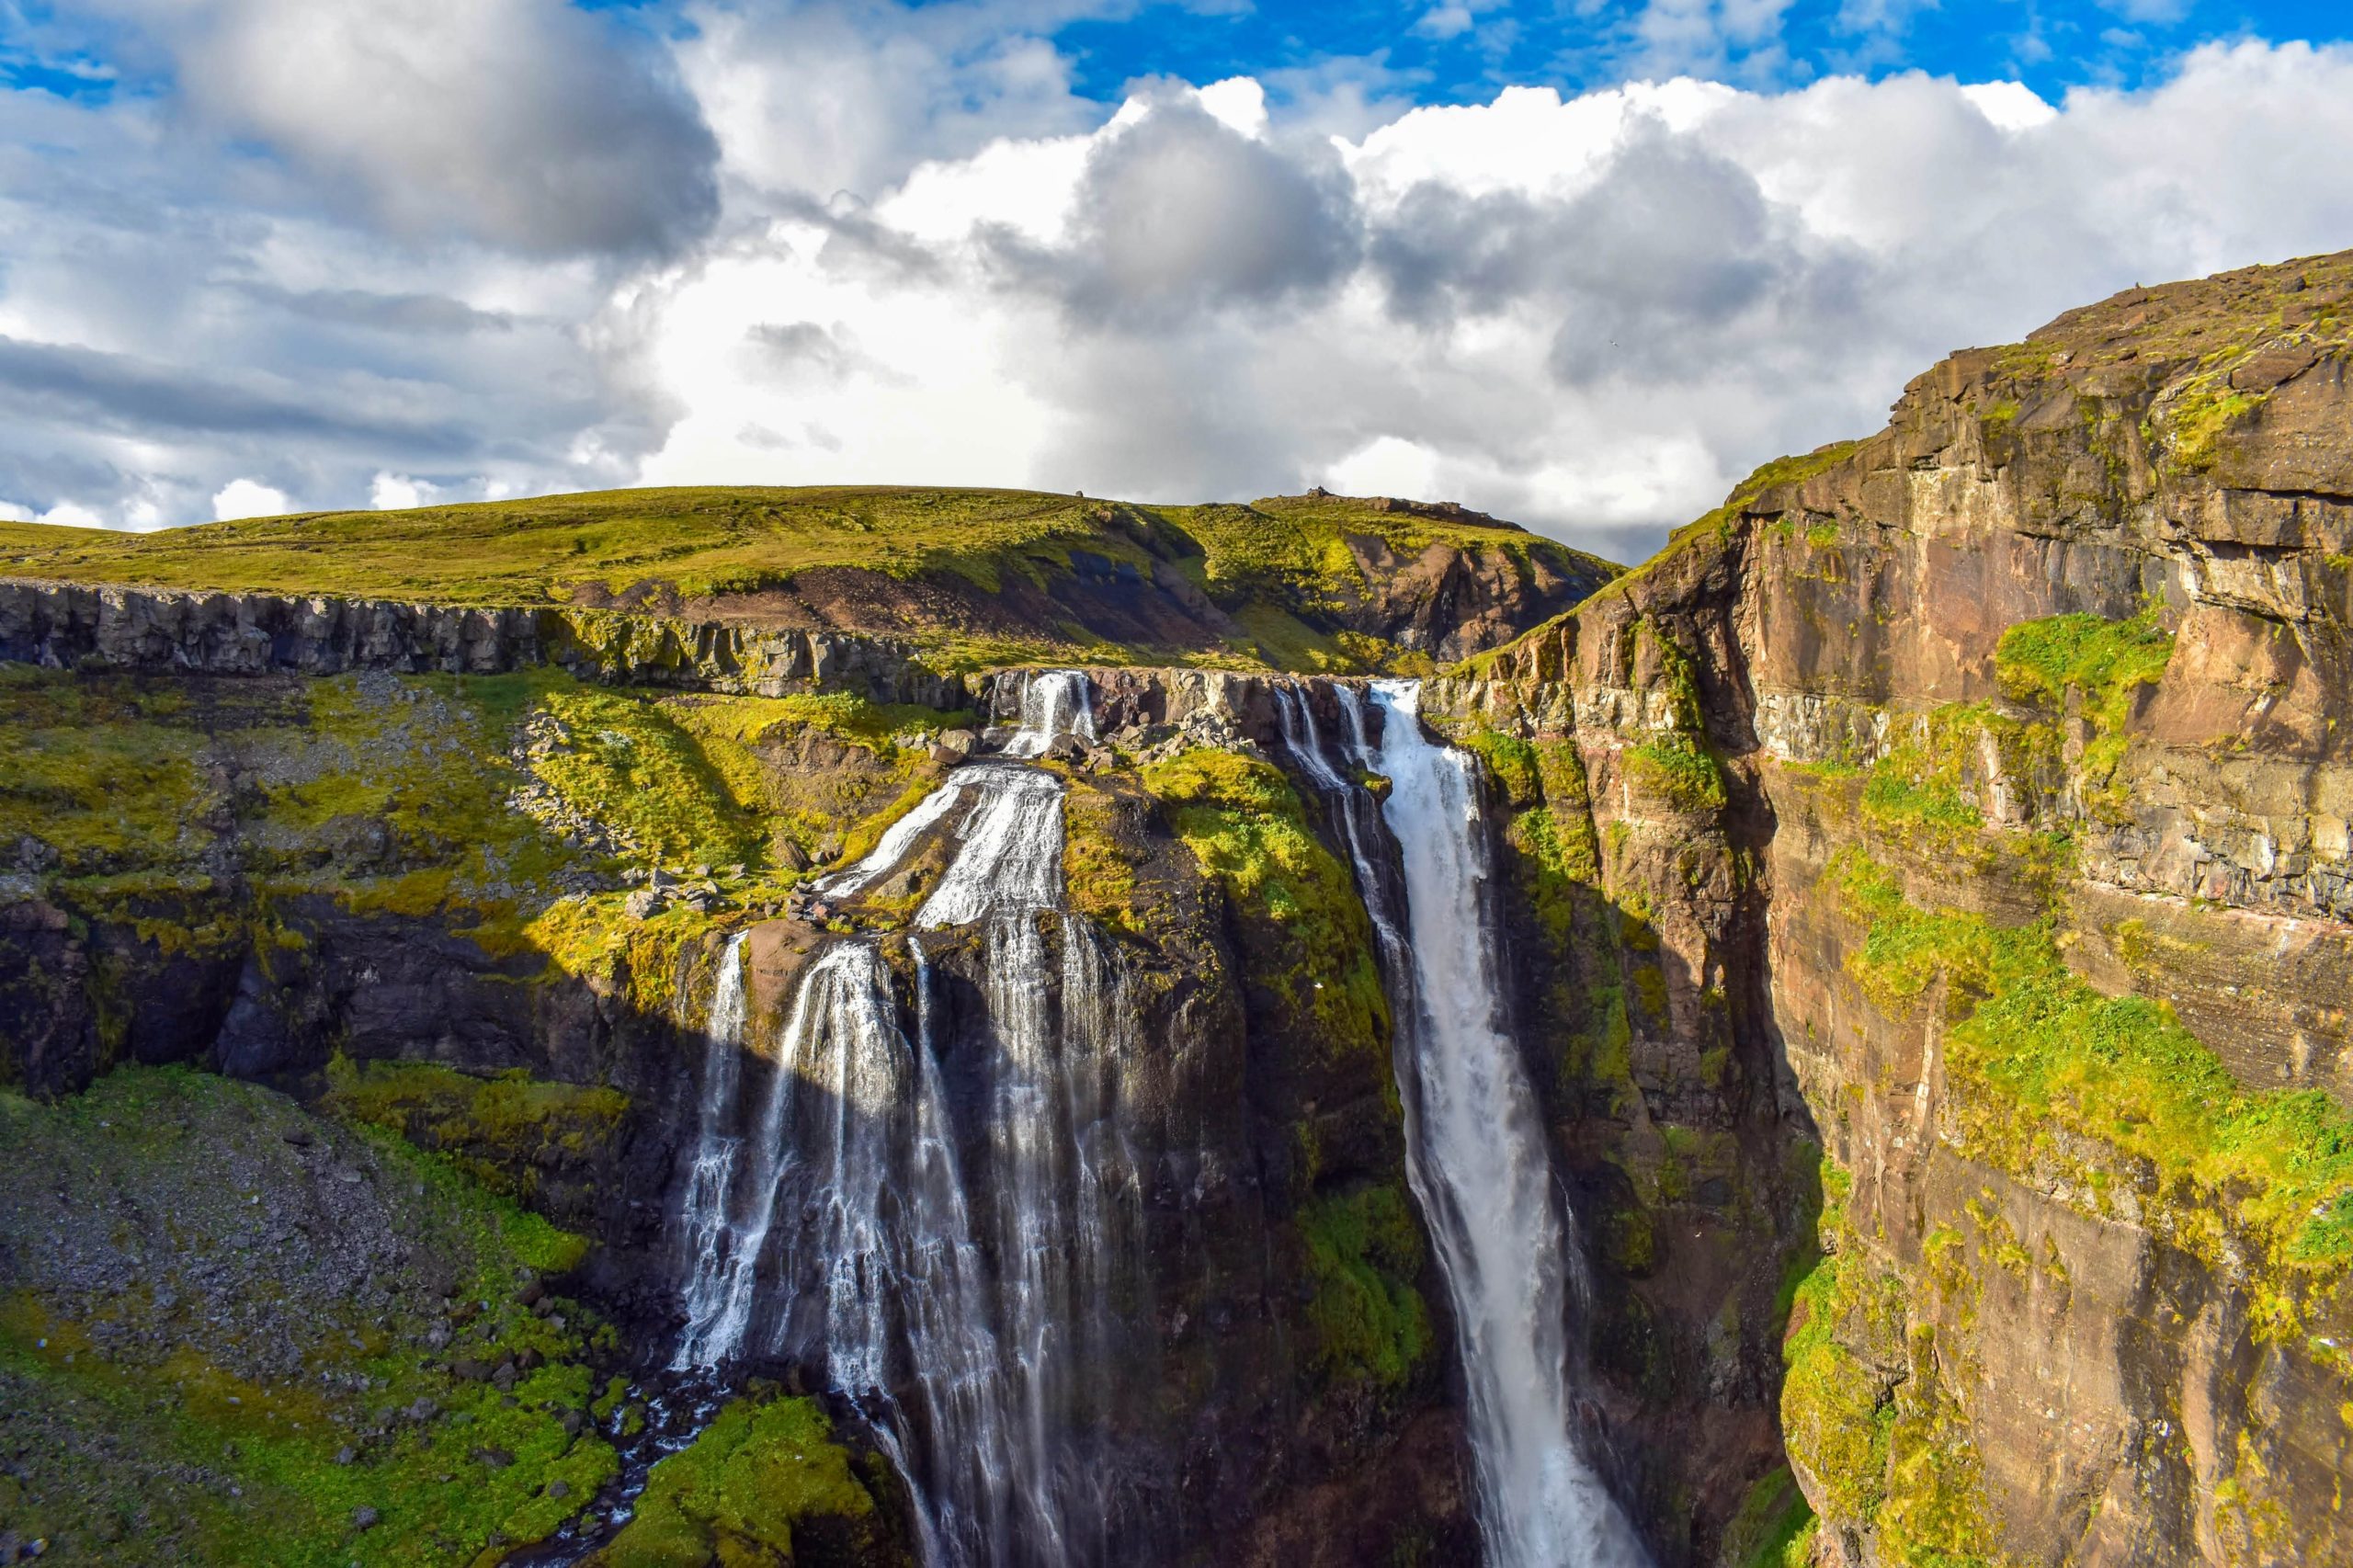 The waterfall, Glymur, in Iceland